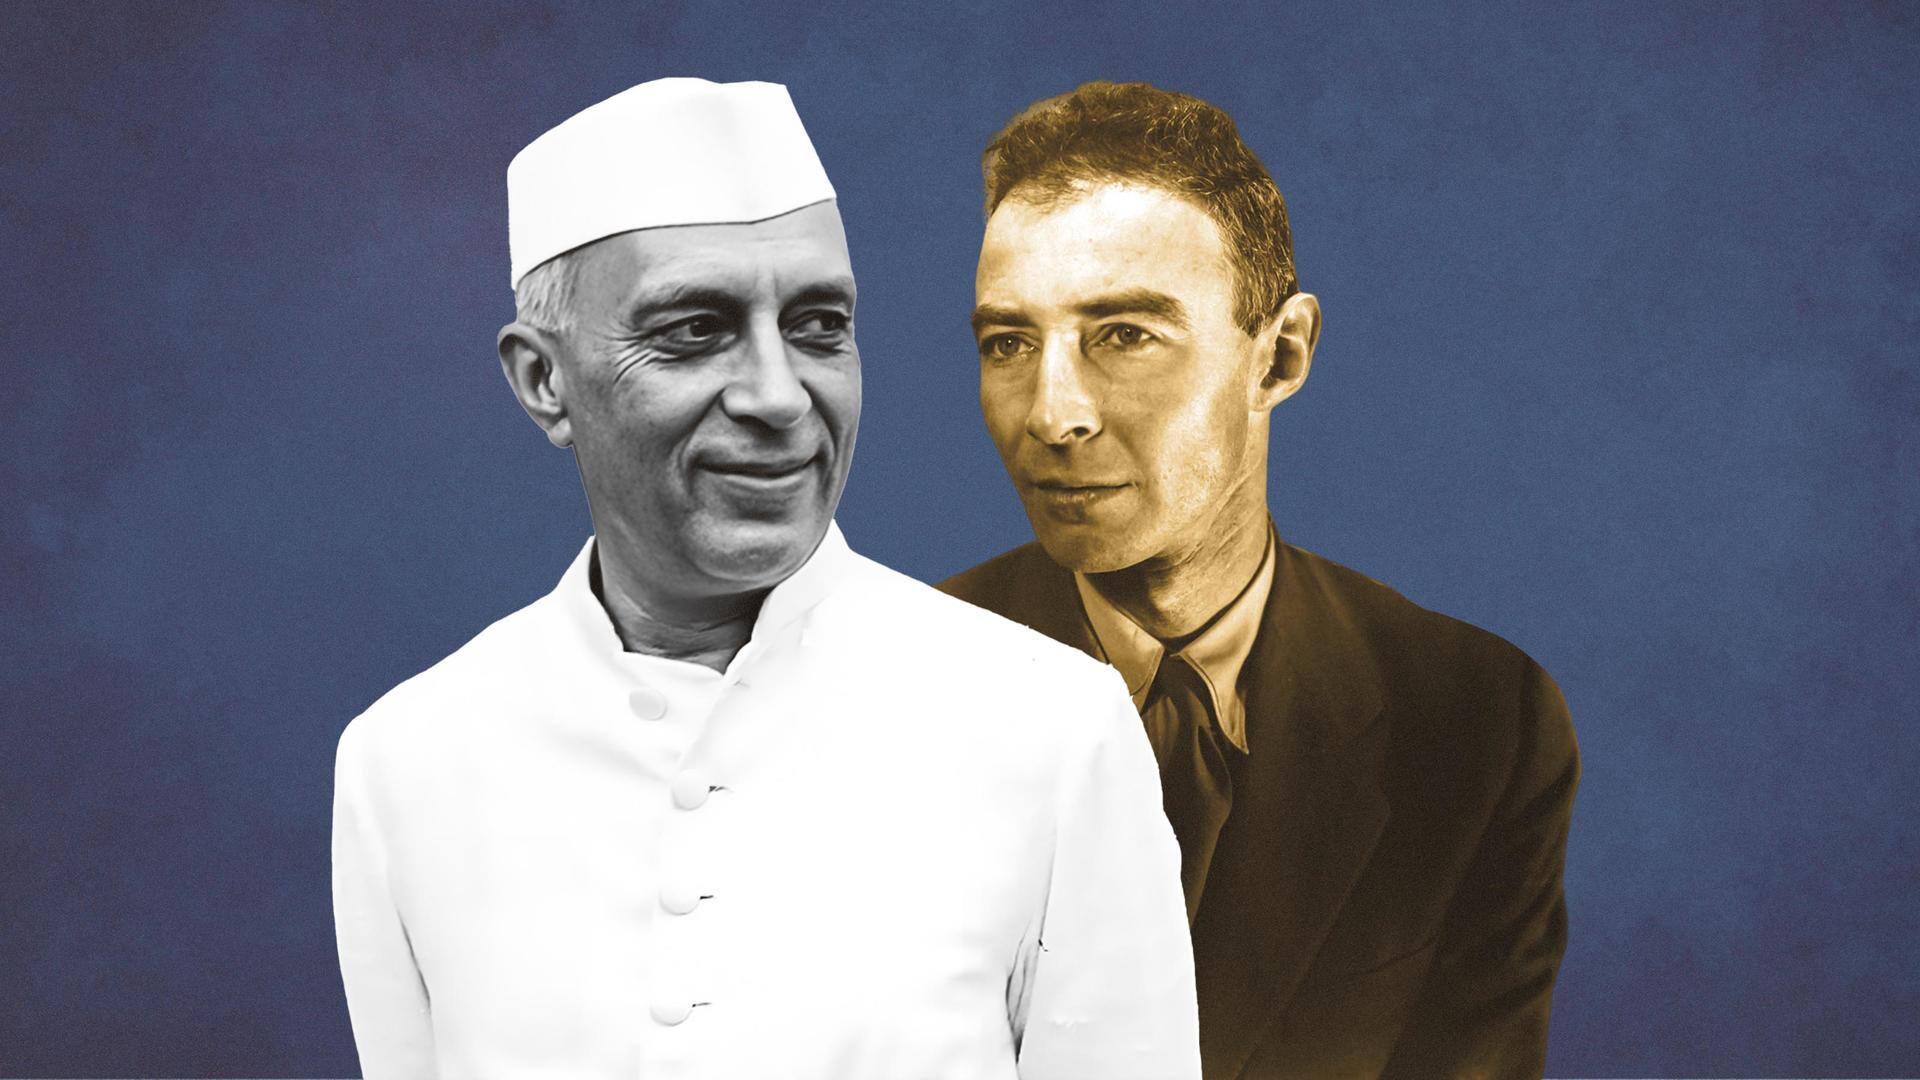 Jawaharlal Nehru once offered Indian citizenship to Oppenheimer: Here's why